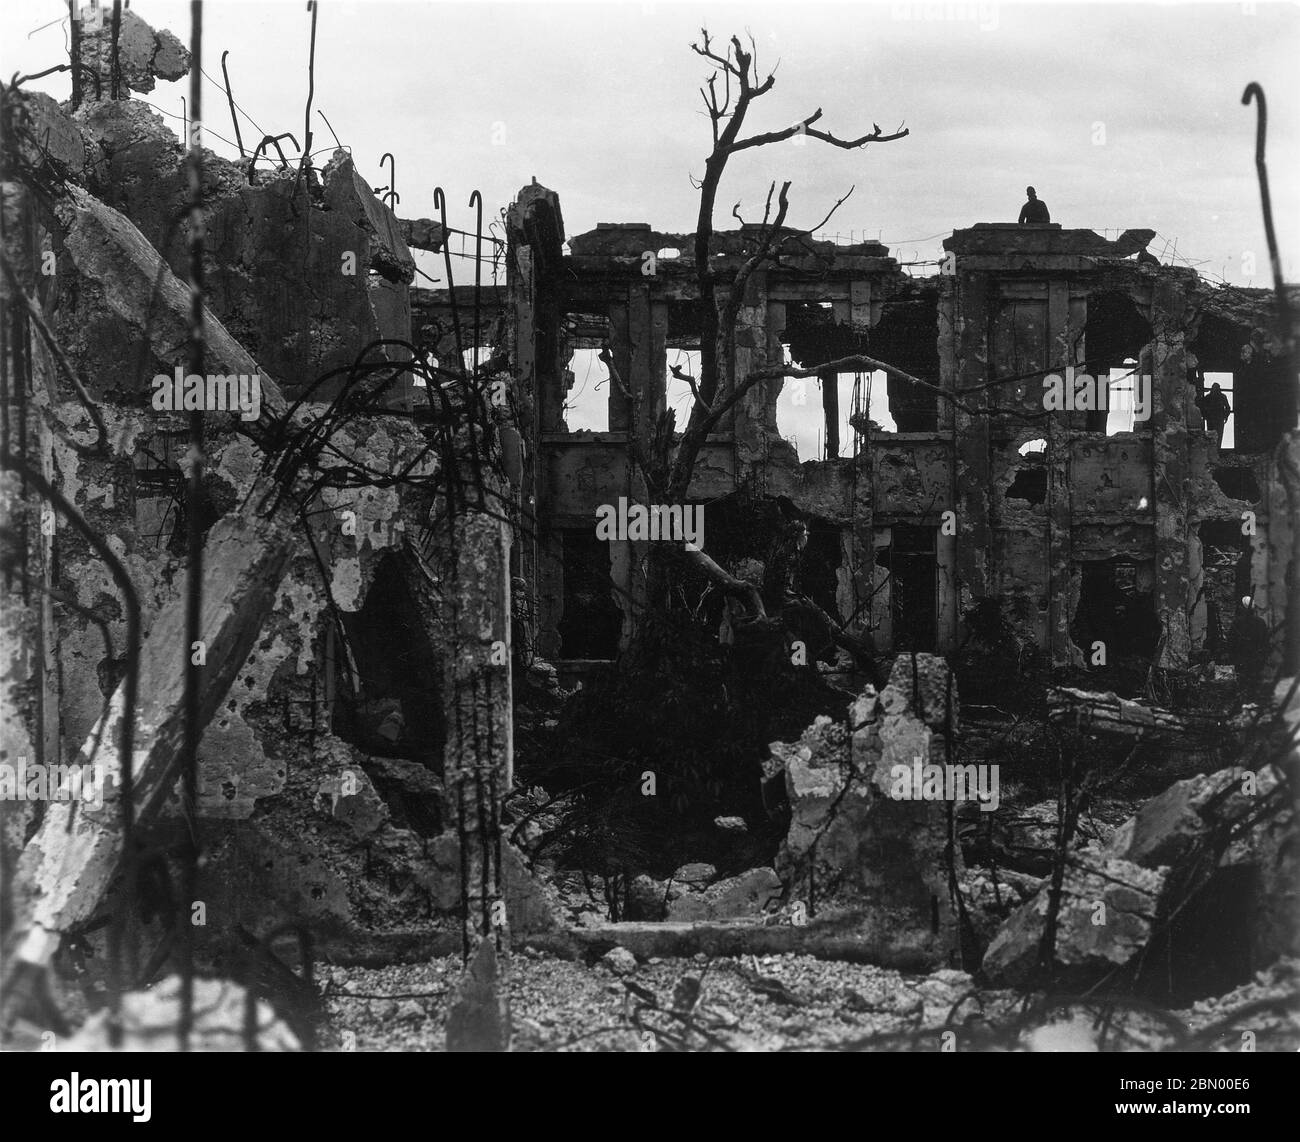 [ 1946 Japan - WWII Ruins of Shuri Castle ] —   WWII Ruins of Shuri Castle (首里城) in Naha, Okinawa, 1946 (Showa 21).  The castle was almost completely destroyed during combat, but was reconstructed during the 1990s.  In 2019 it was destroyed again when an electrical fault caused a devastating fire.  20th century gelatin silver print. Stock Photo